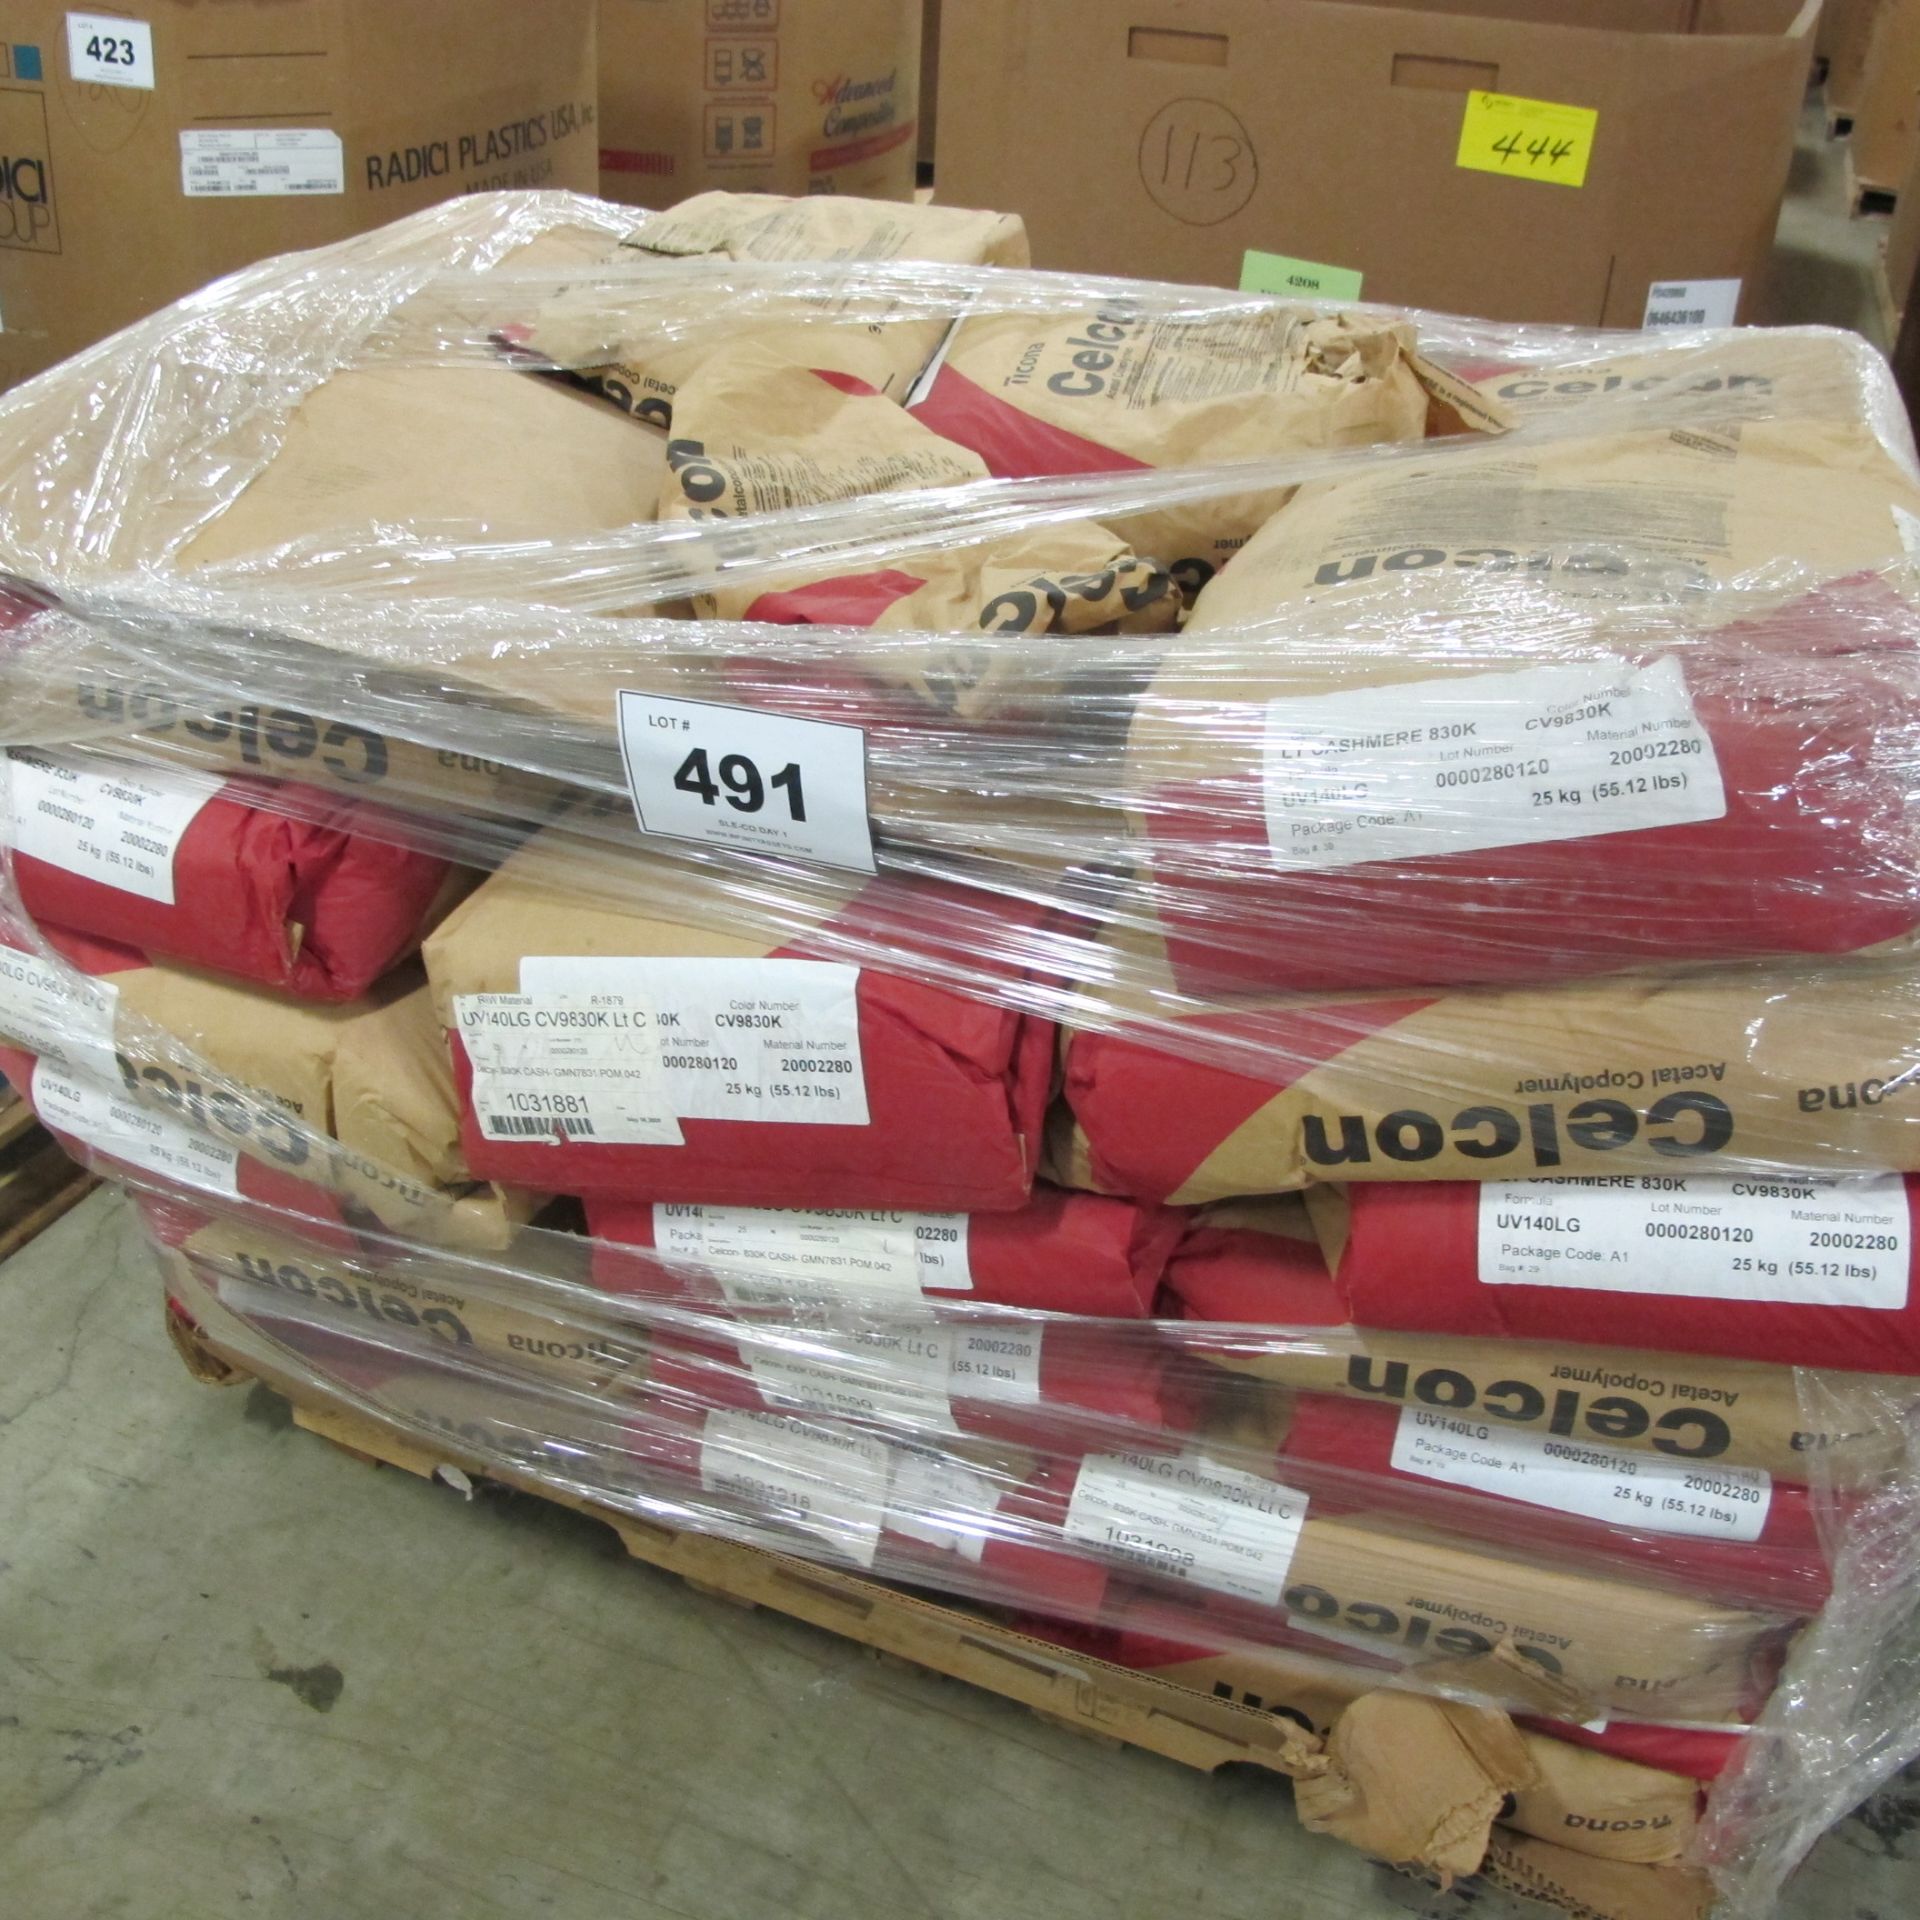 1 PALLET OF UV 140 LG CELCON, APPROX 35 BAGS